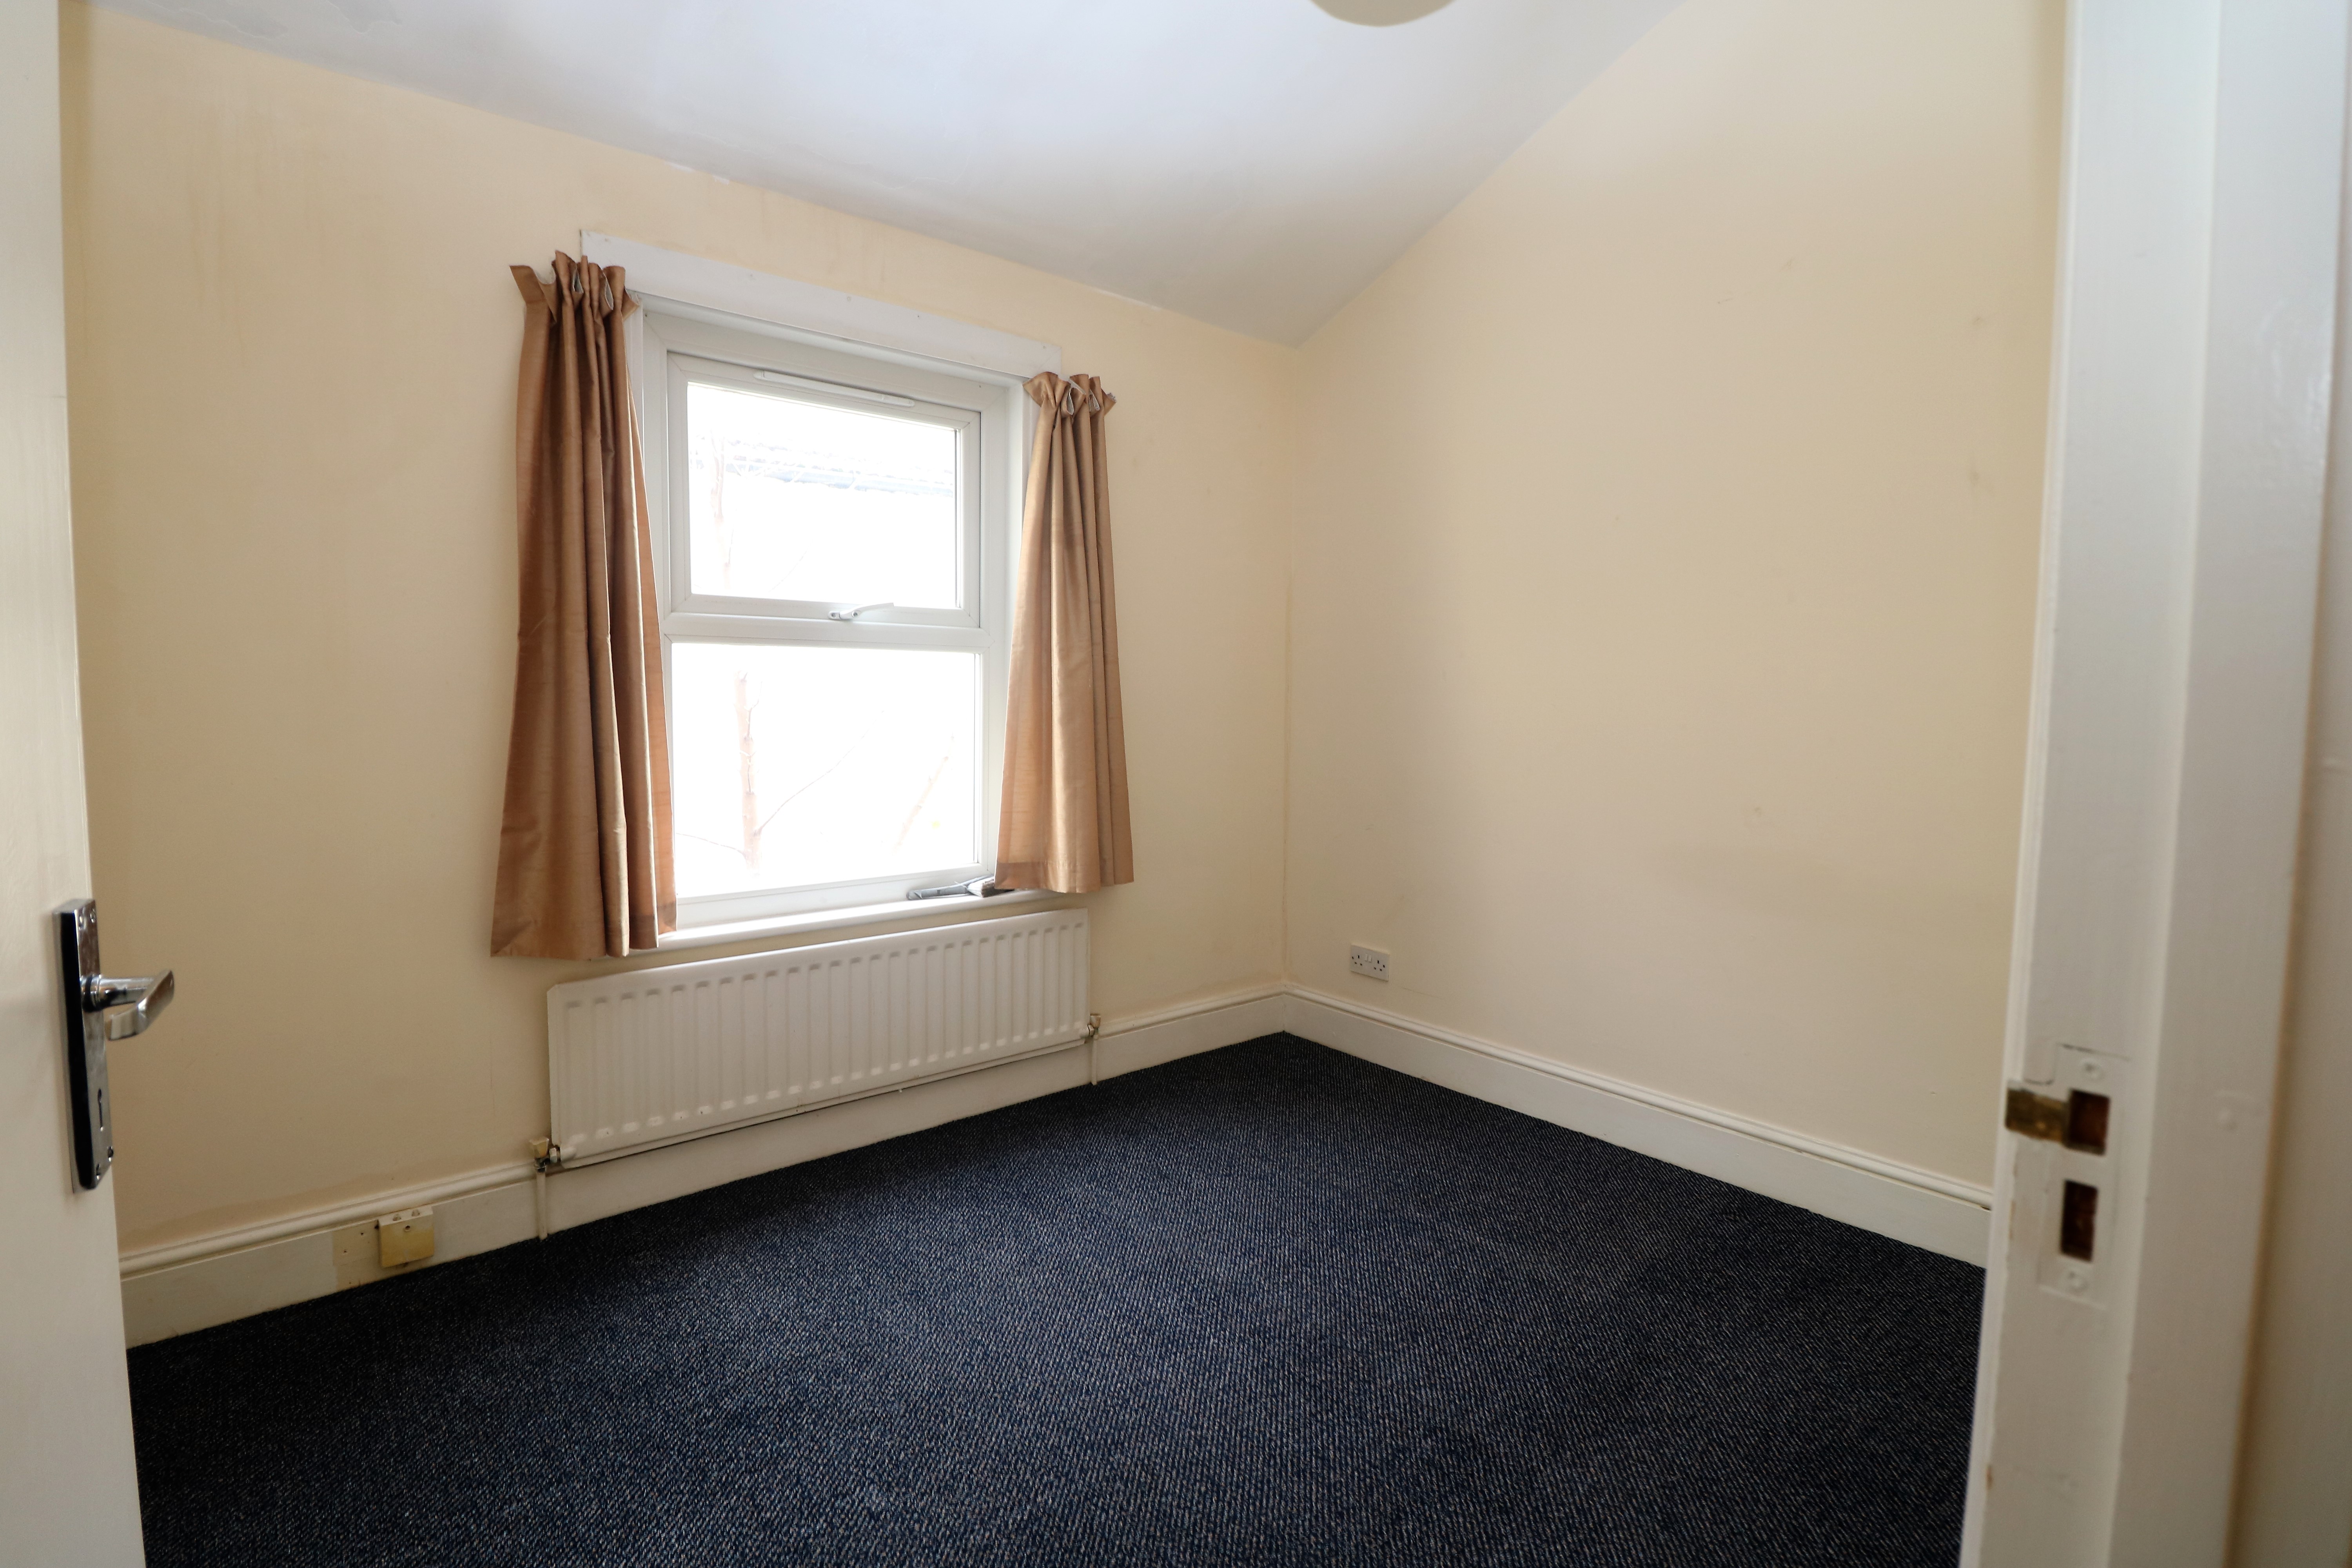 Spacious top floor 2 bed flat in N4. Modern kitchen and separate lounge.